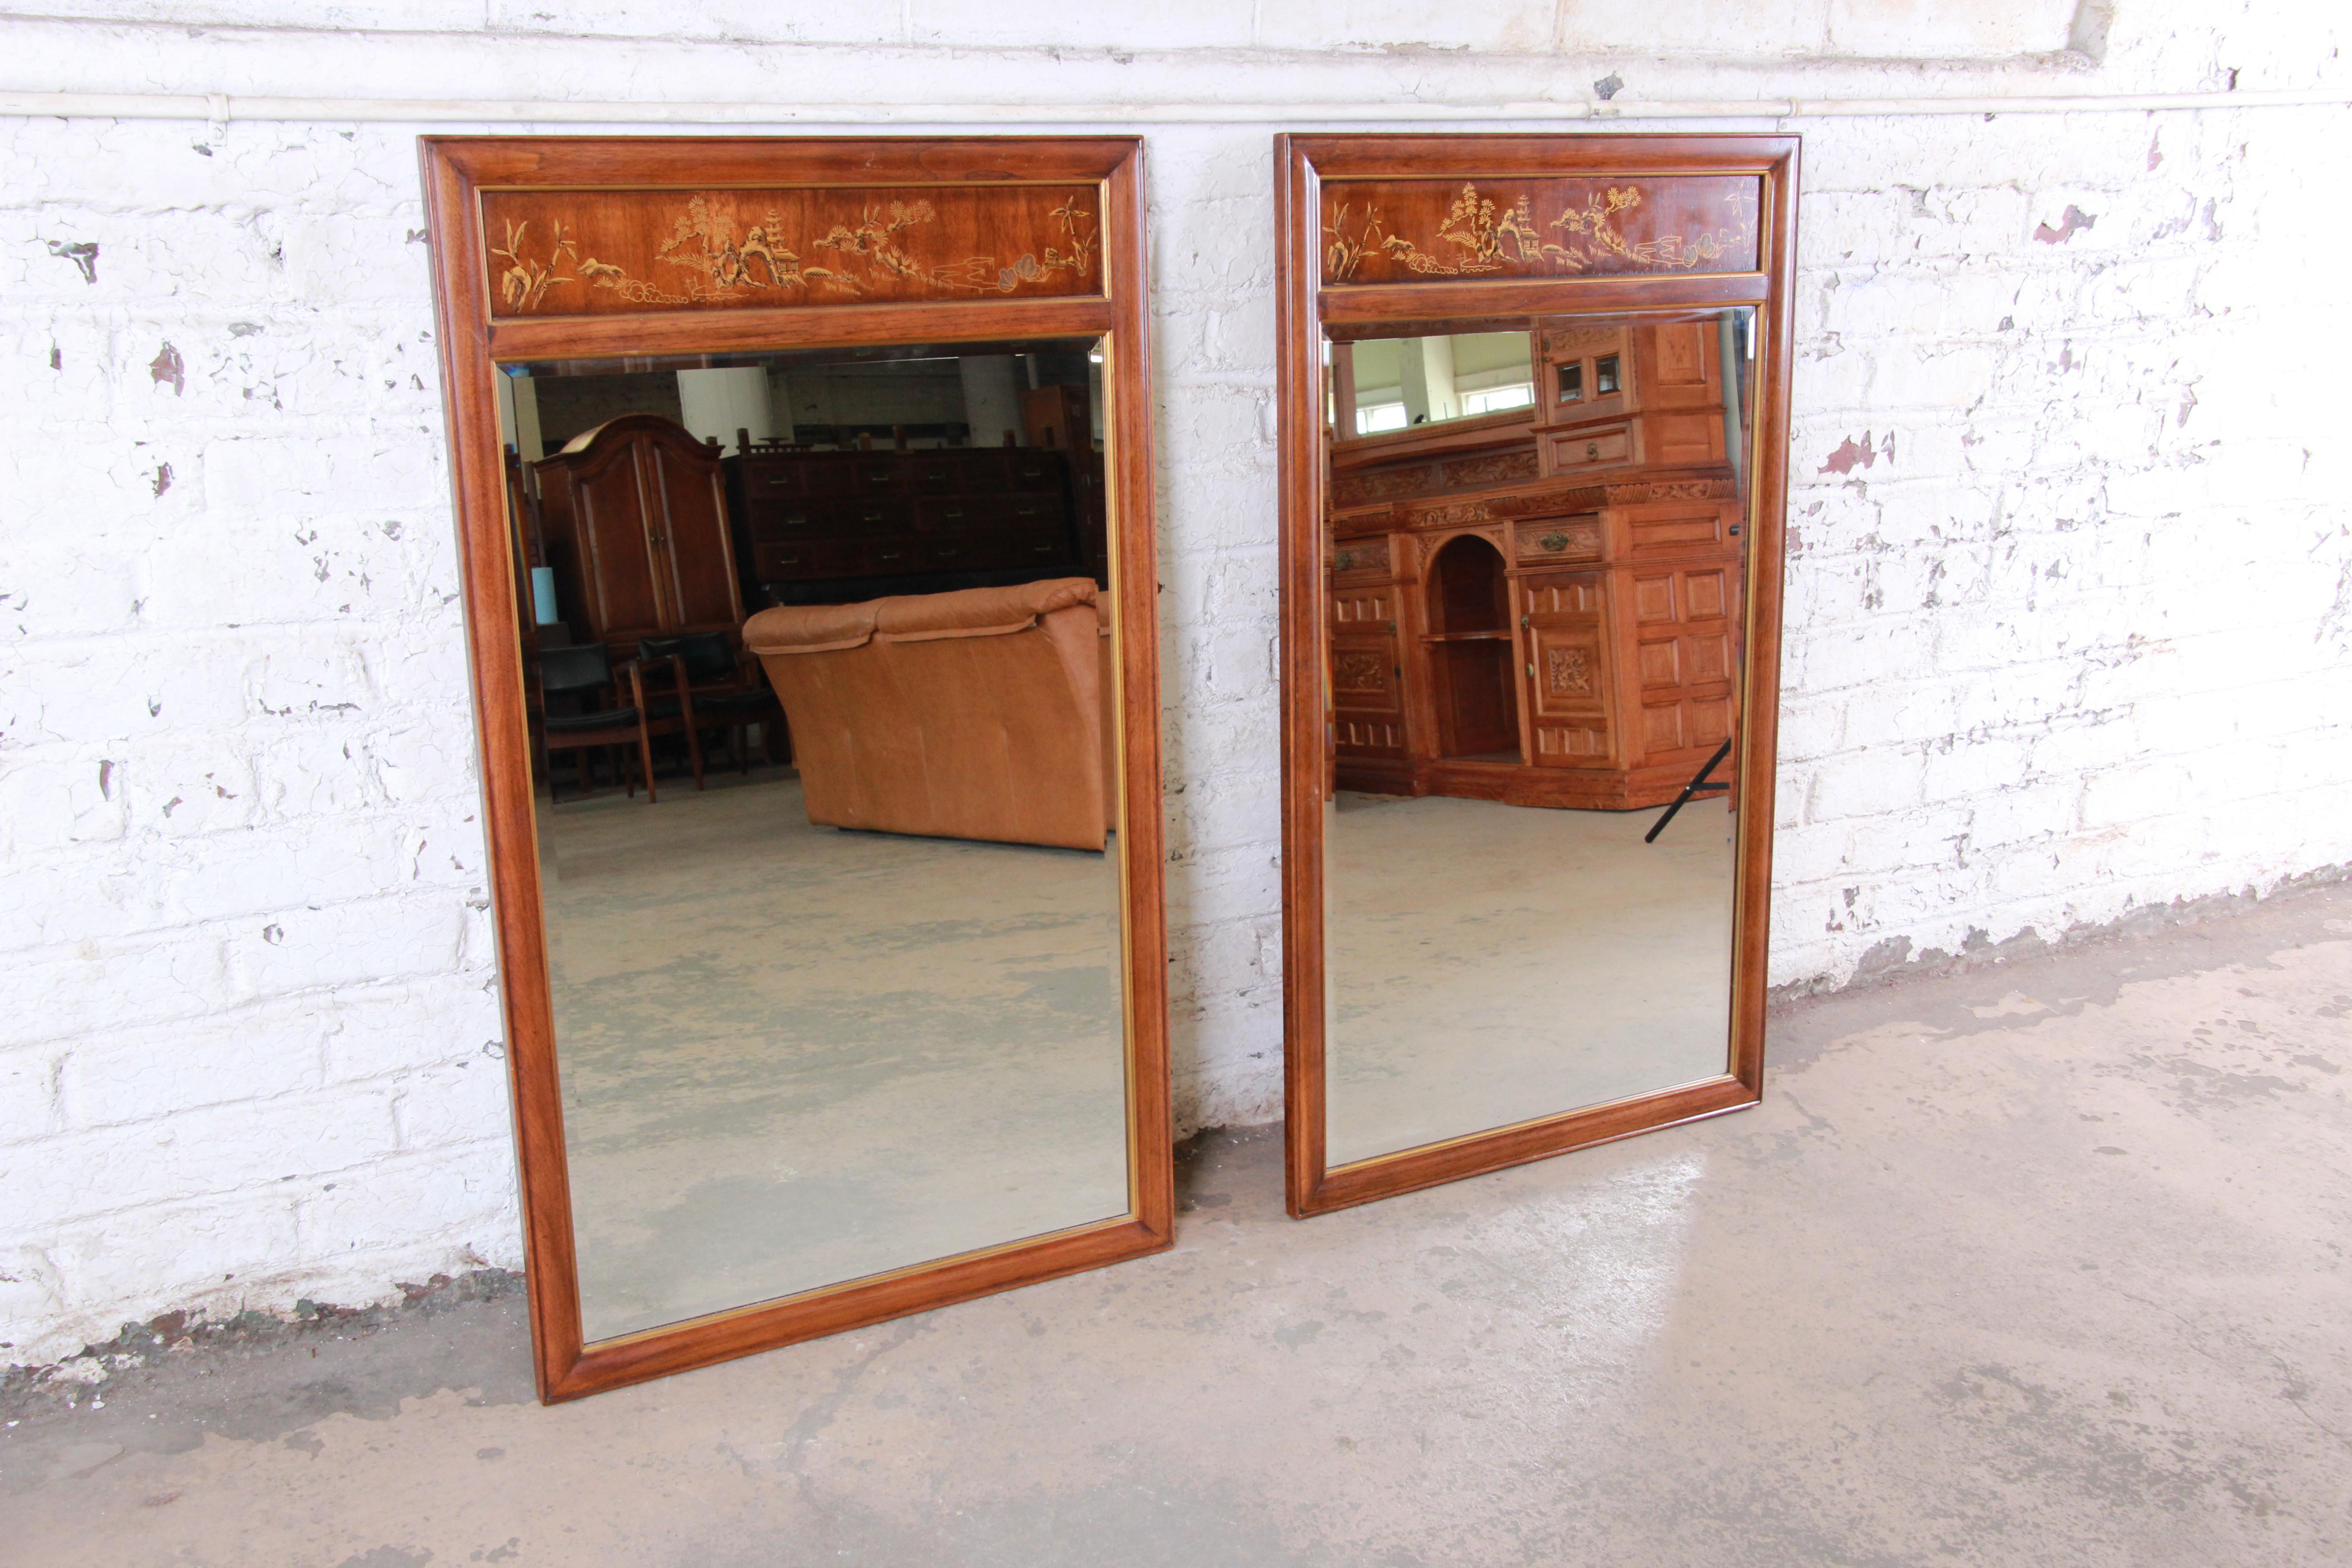 An gorgeous pair of Hollywood Regency chinoiserie beveled wall mirrors from the Dynasty Collection by Drexel Heritage. The mirrors feature gorgeous walnut wood grain and beautiful painted Asian nature scenes. The original label is present on the